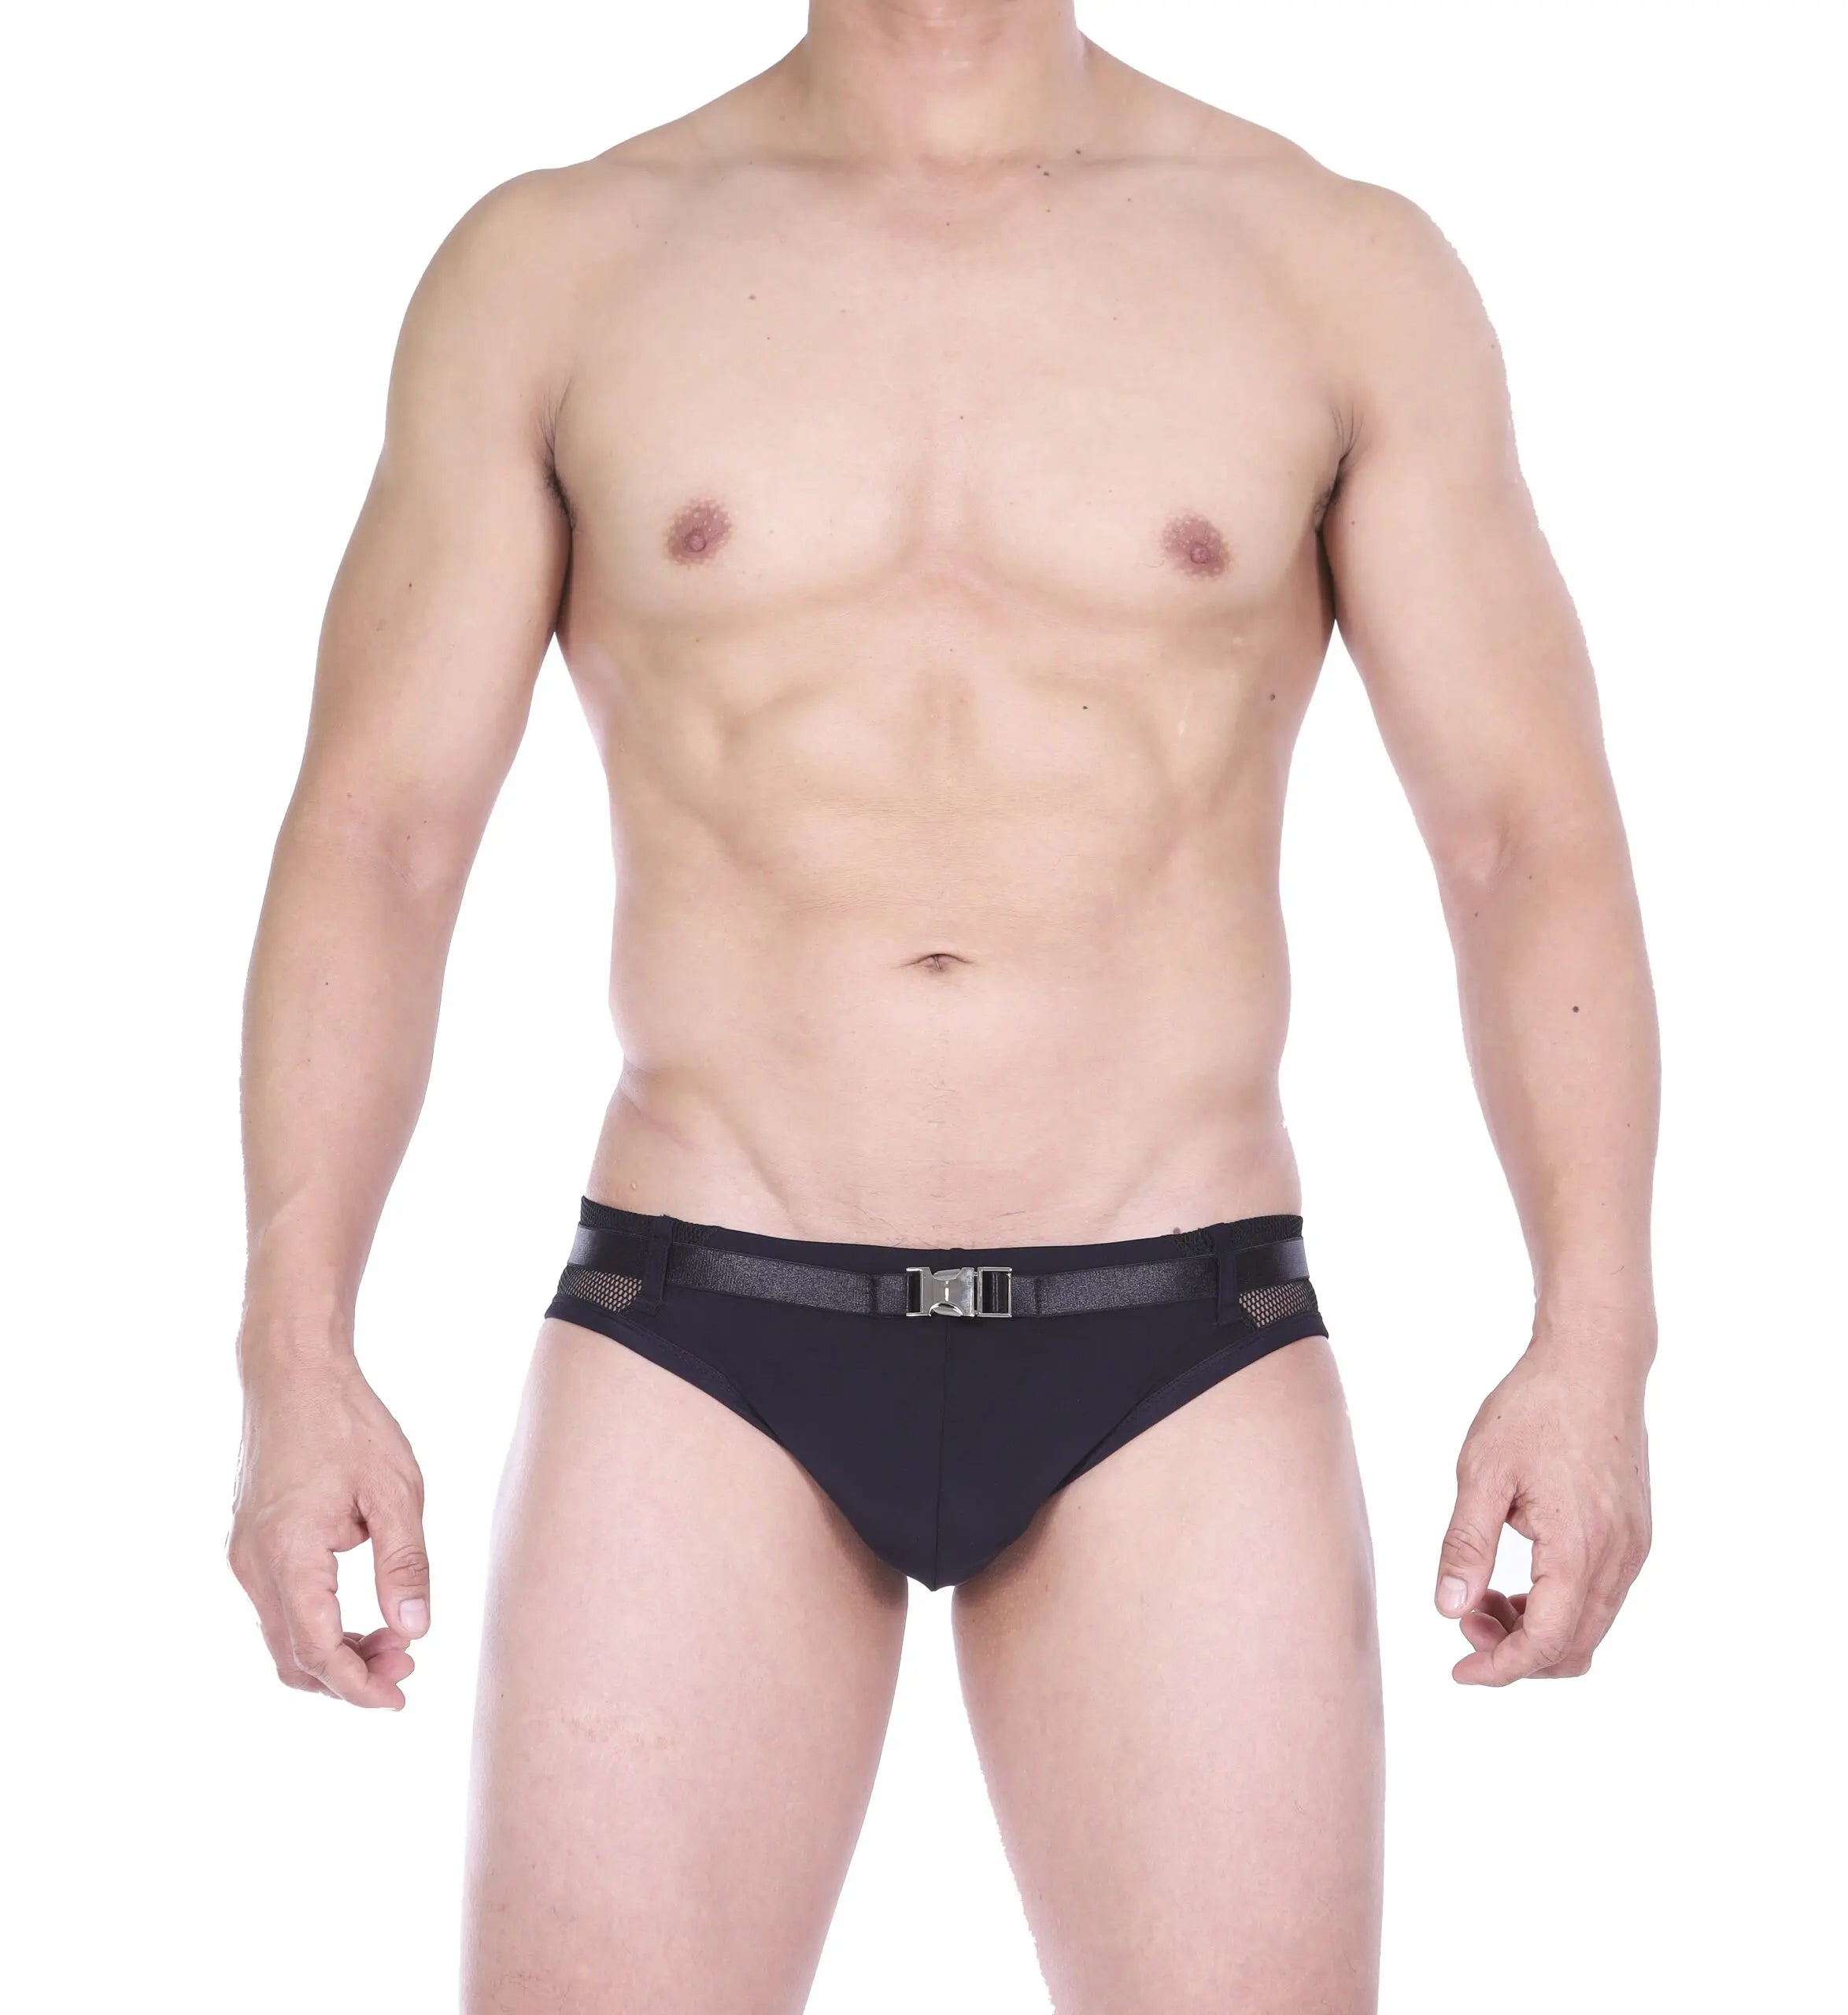 GYREE LOW RISE BRIEF